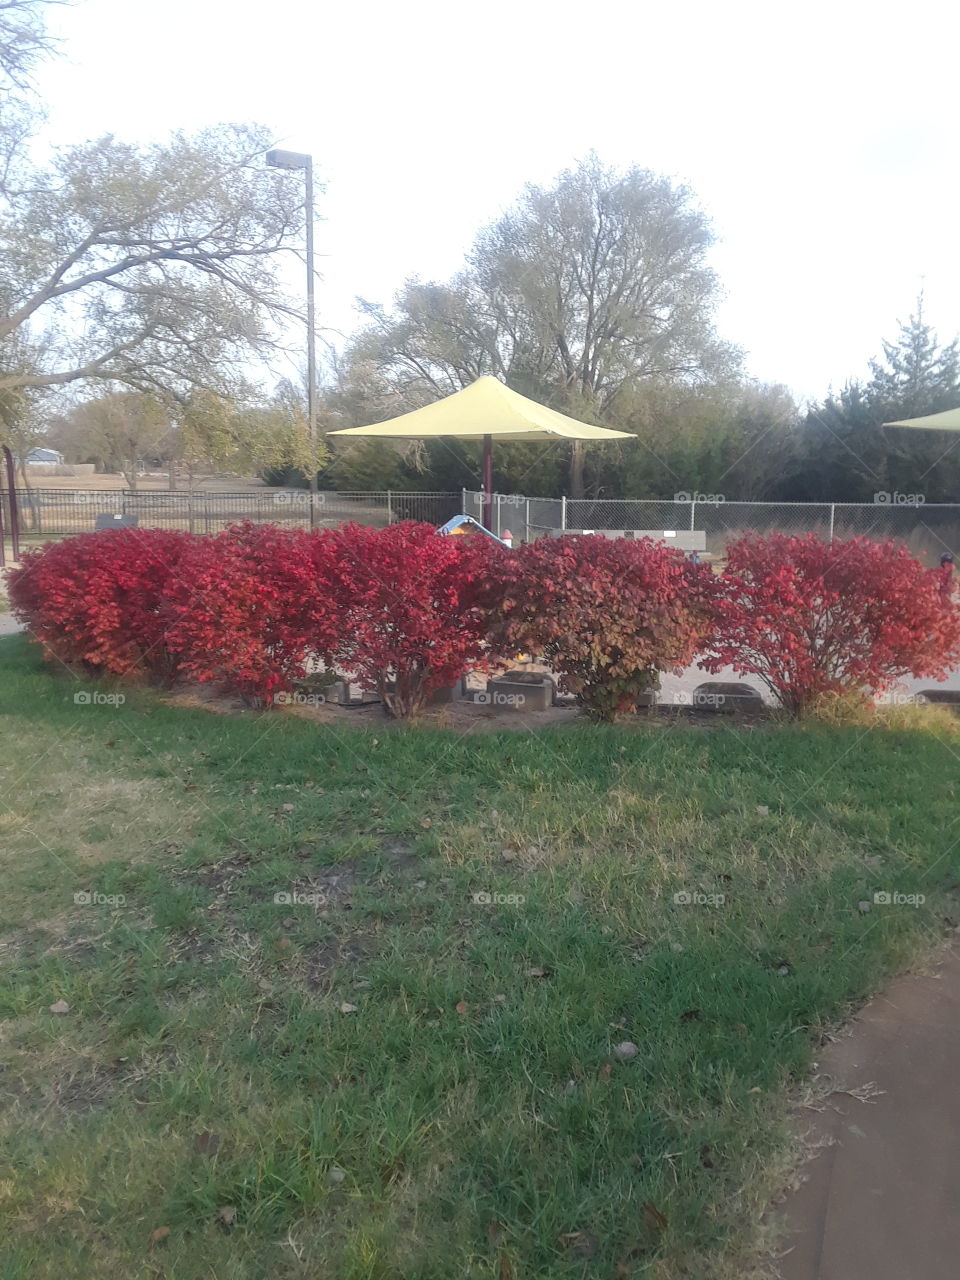 Red Bushes At The Park